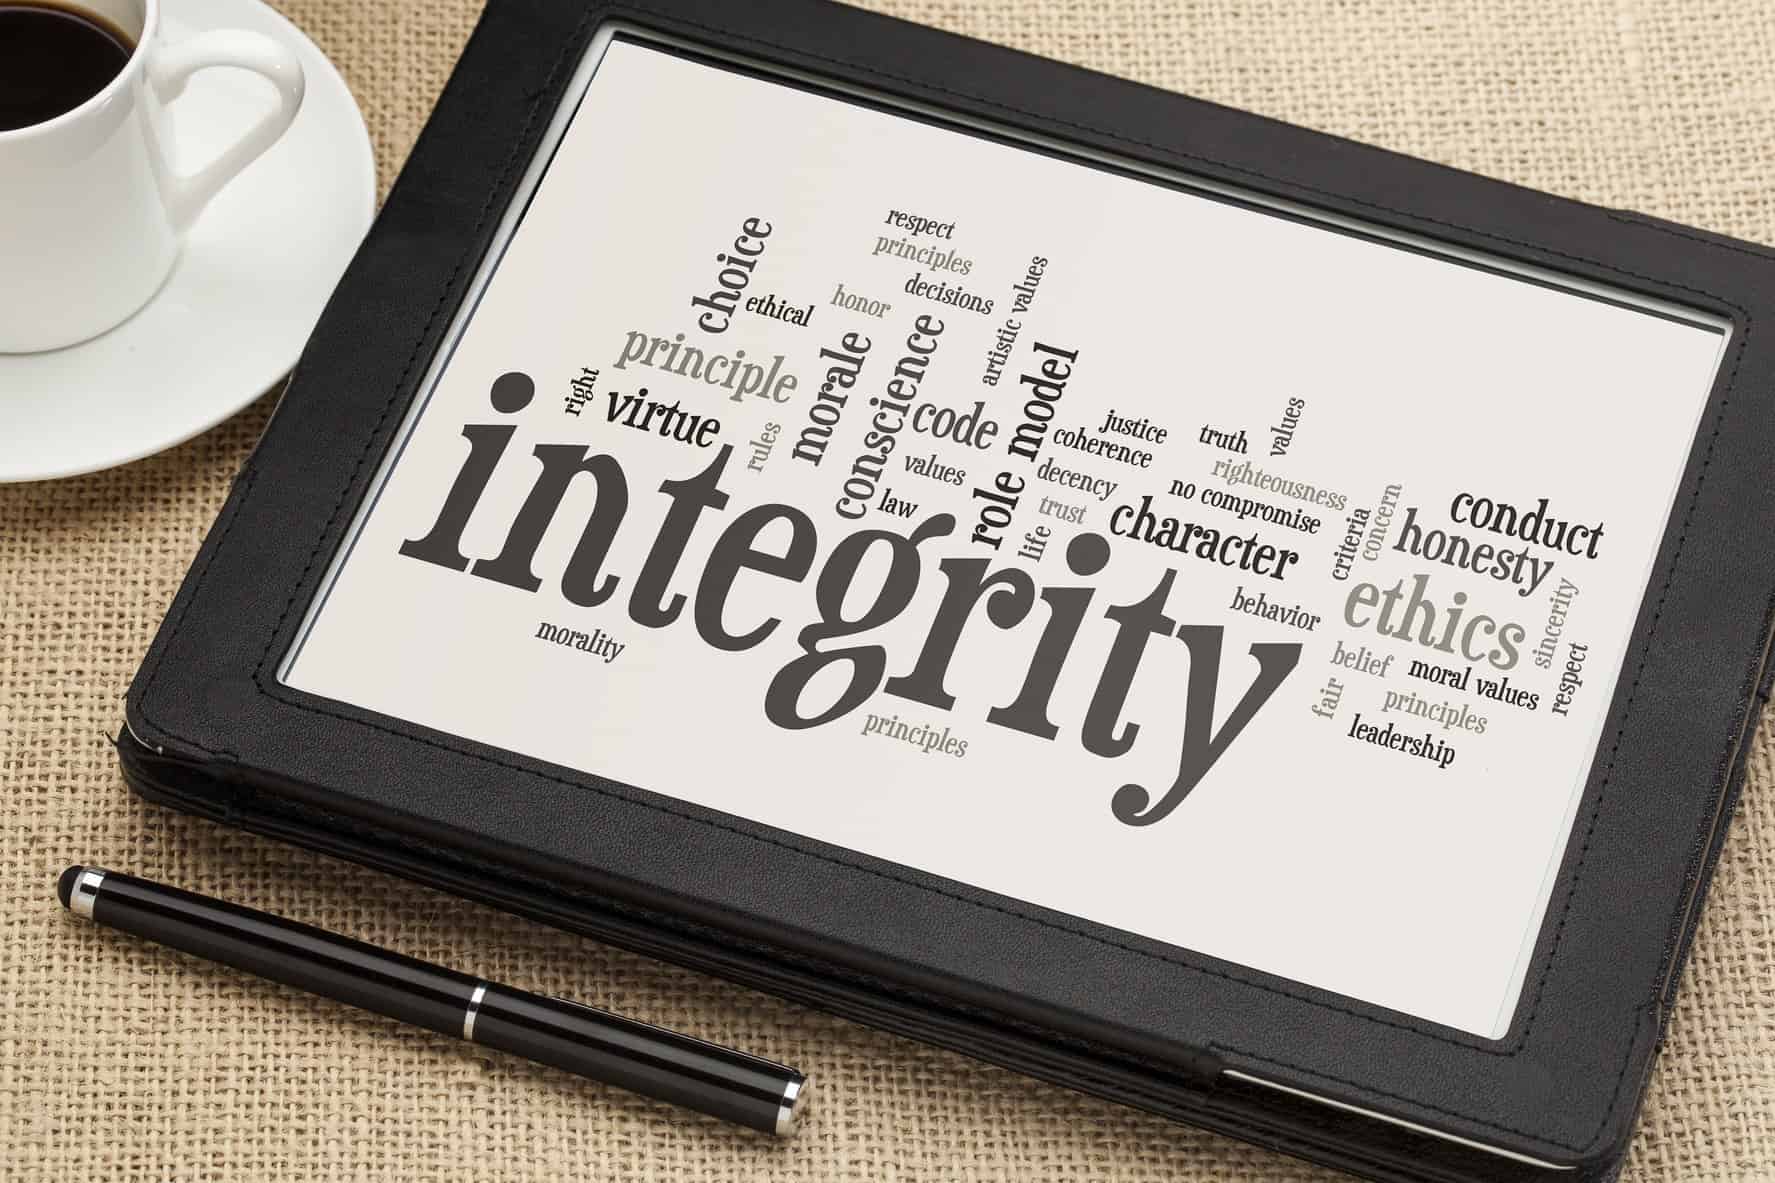 Executive Sales Leader Briefing: Do Others See Integrity in You?